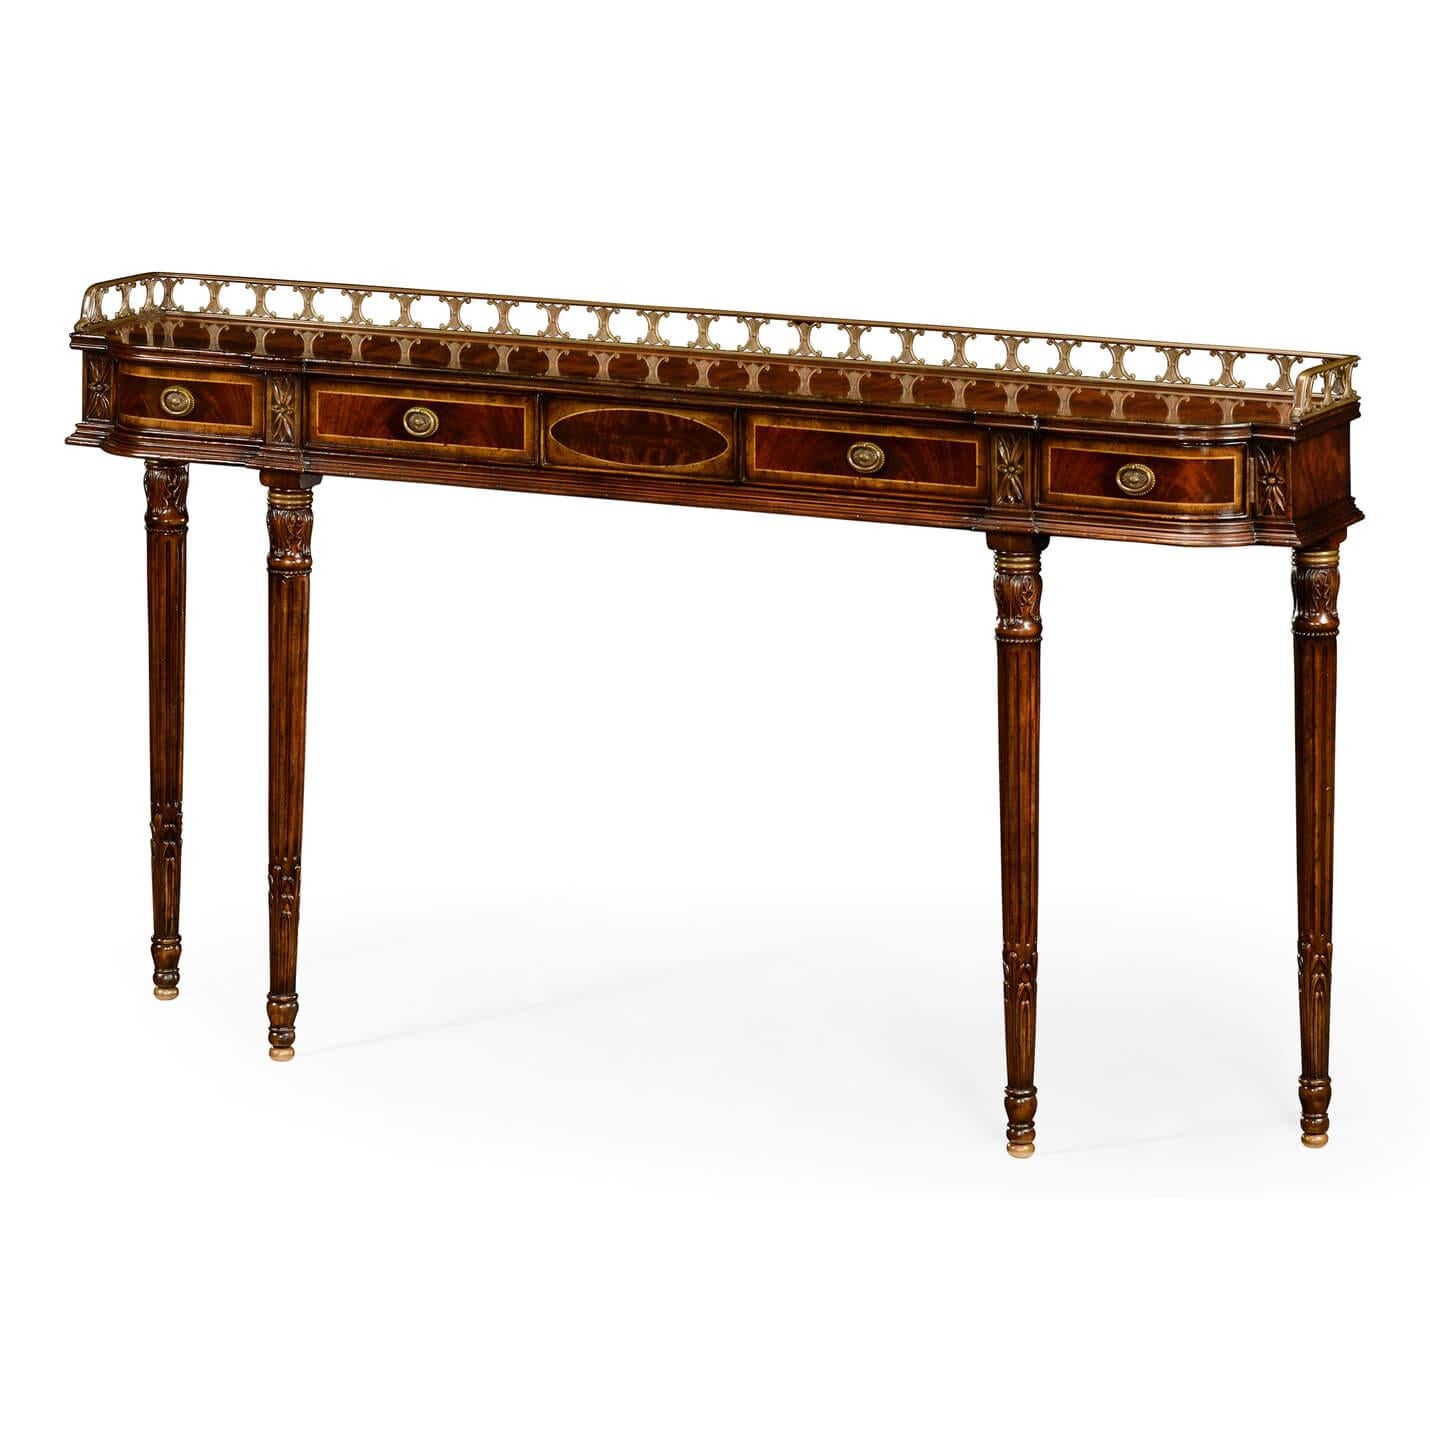 An English Regency style mahogany console table with a tall pierced bronze gallery, figured mahogany veneers with cross-banded drawers, 'D' form frieze with oak secondary wood, with two swivel end drawers, a central swivel drawer flanked by two flat